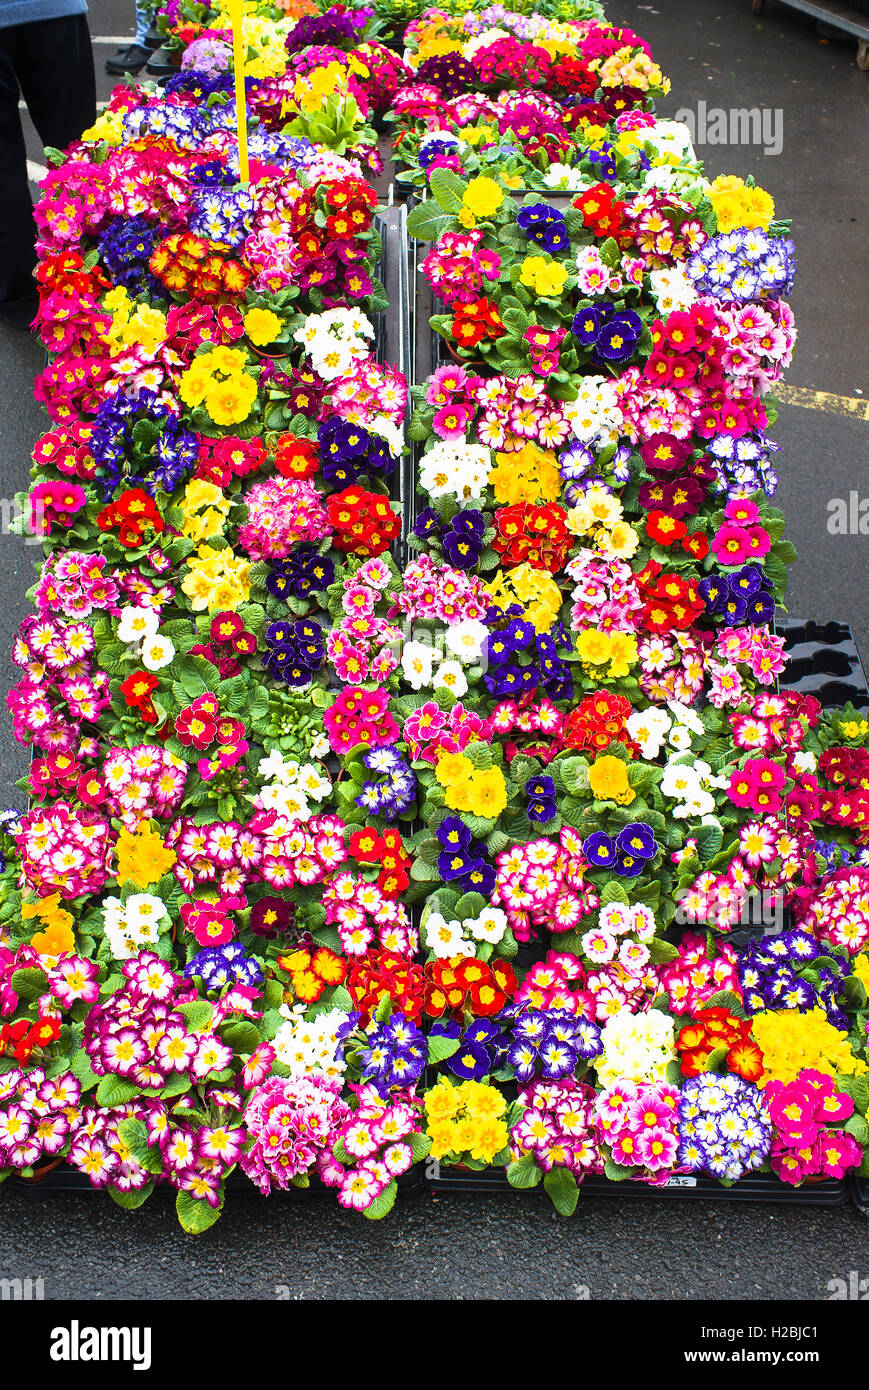 A colourful mosaic of primroses for sale at a garden centre Stock Photo